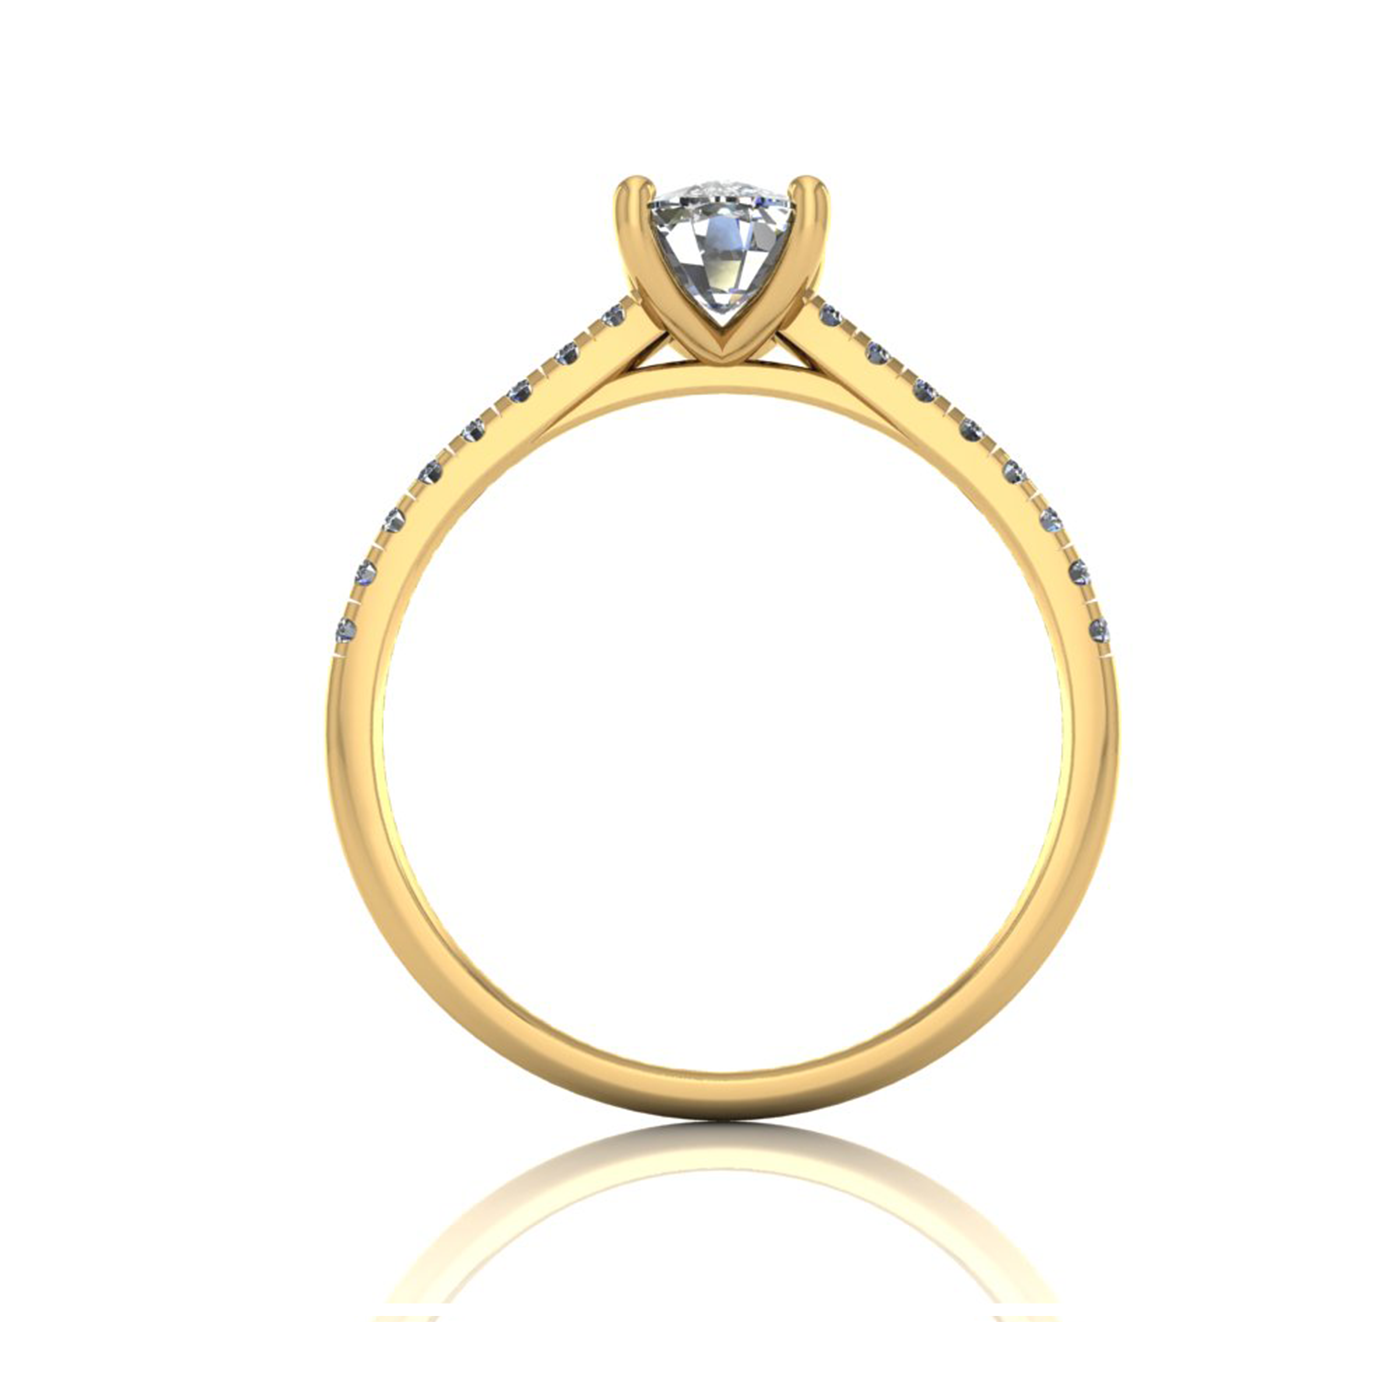 18k yellow gold  4 prongs cushion cut diamond engagement ring with whisper thin pavÉ set band Photos & images